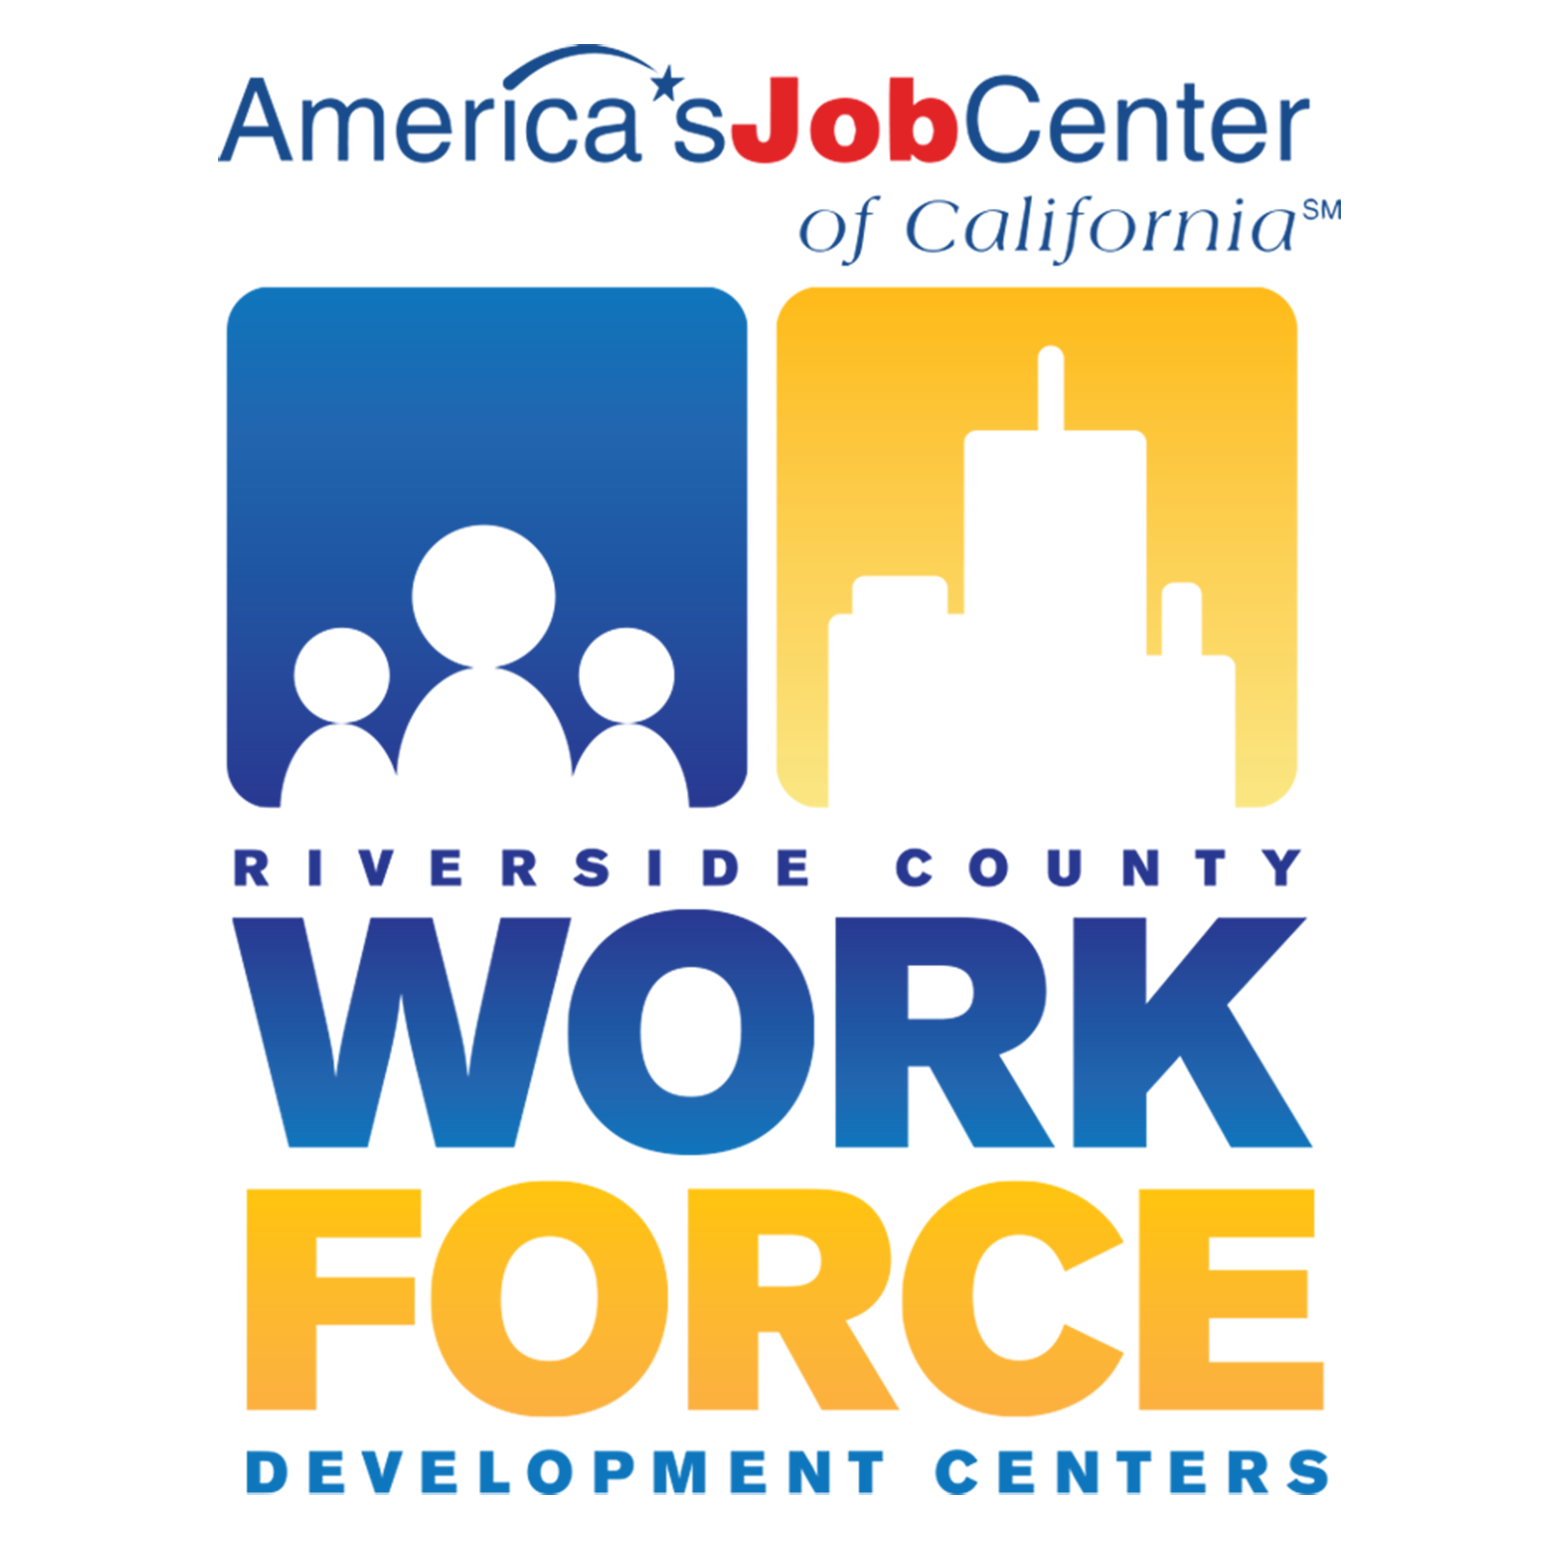 Riverside County Workforce Development Division Awarded $1,824,000 through the State of California’s Apprenticeship Expansion, Equity, and Innovation Grant for the Inland